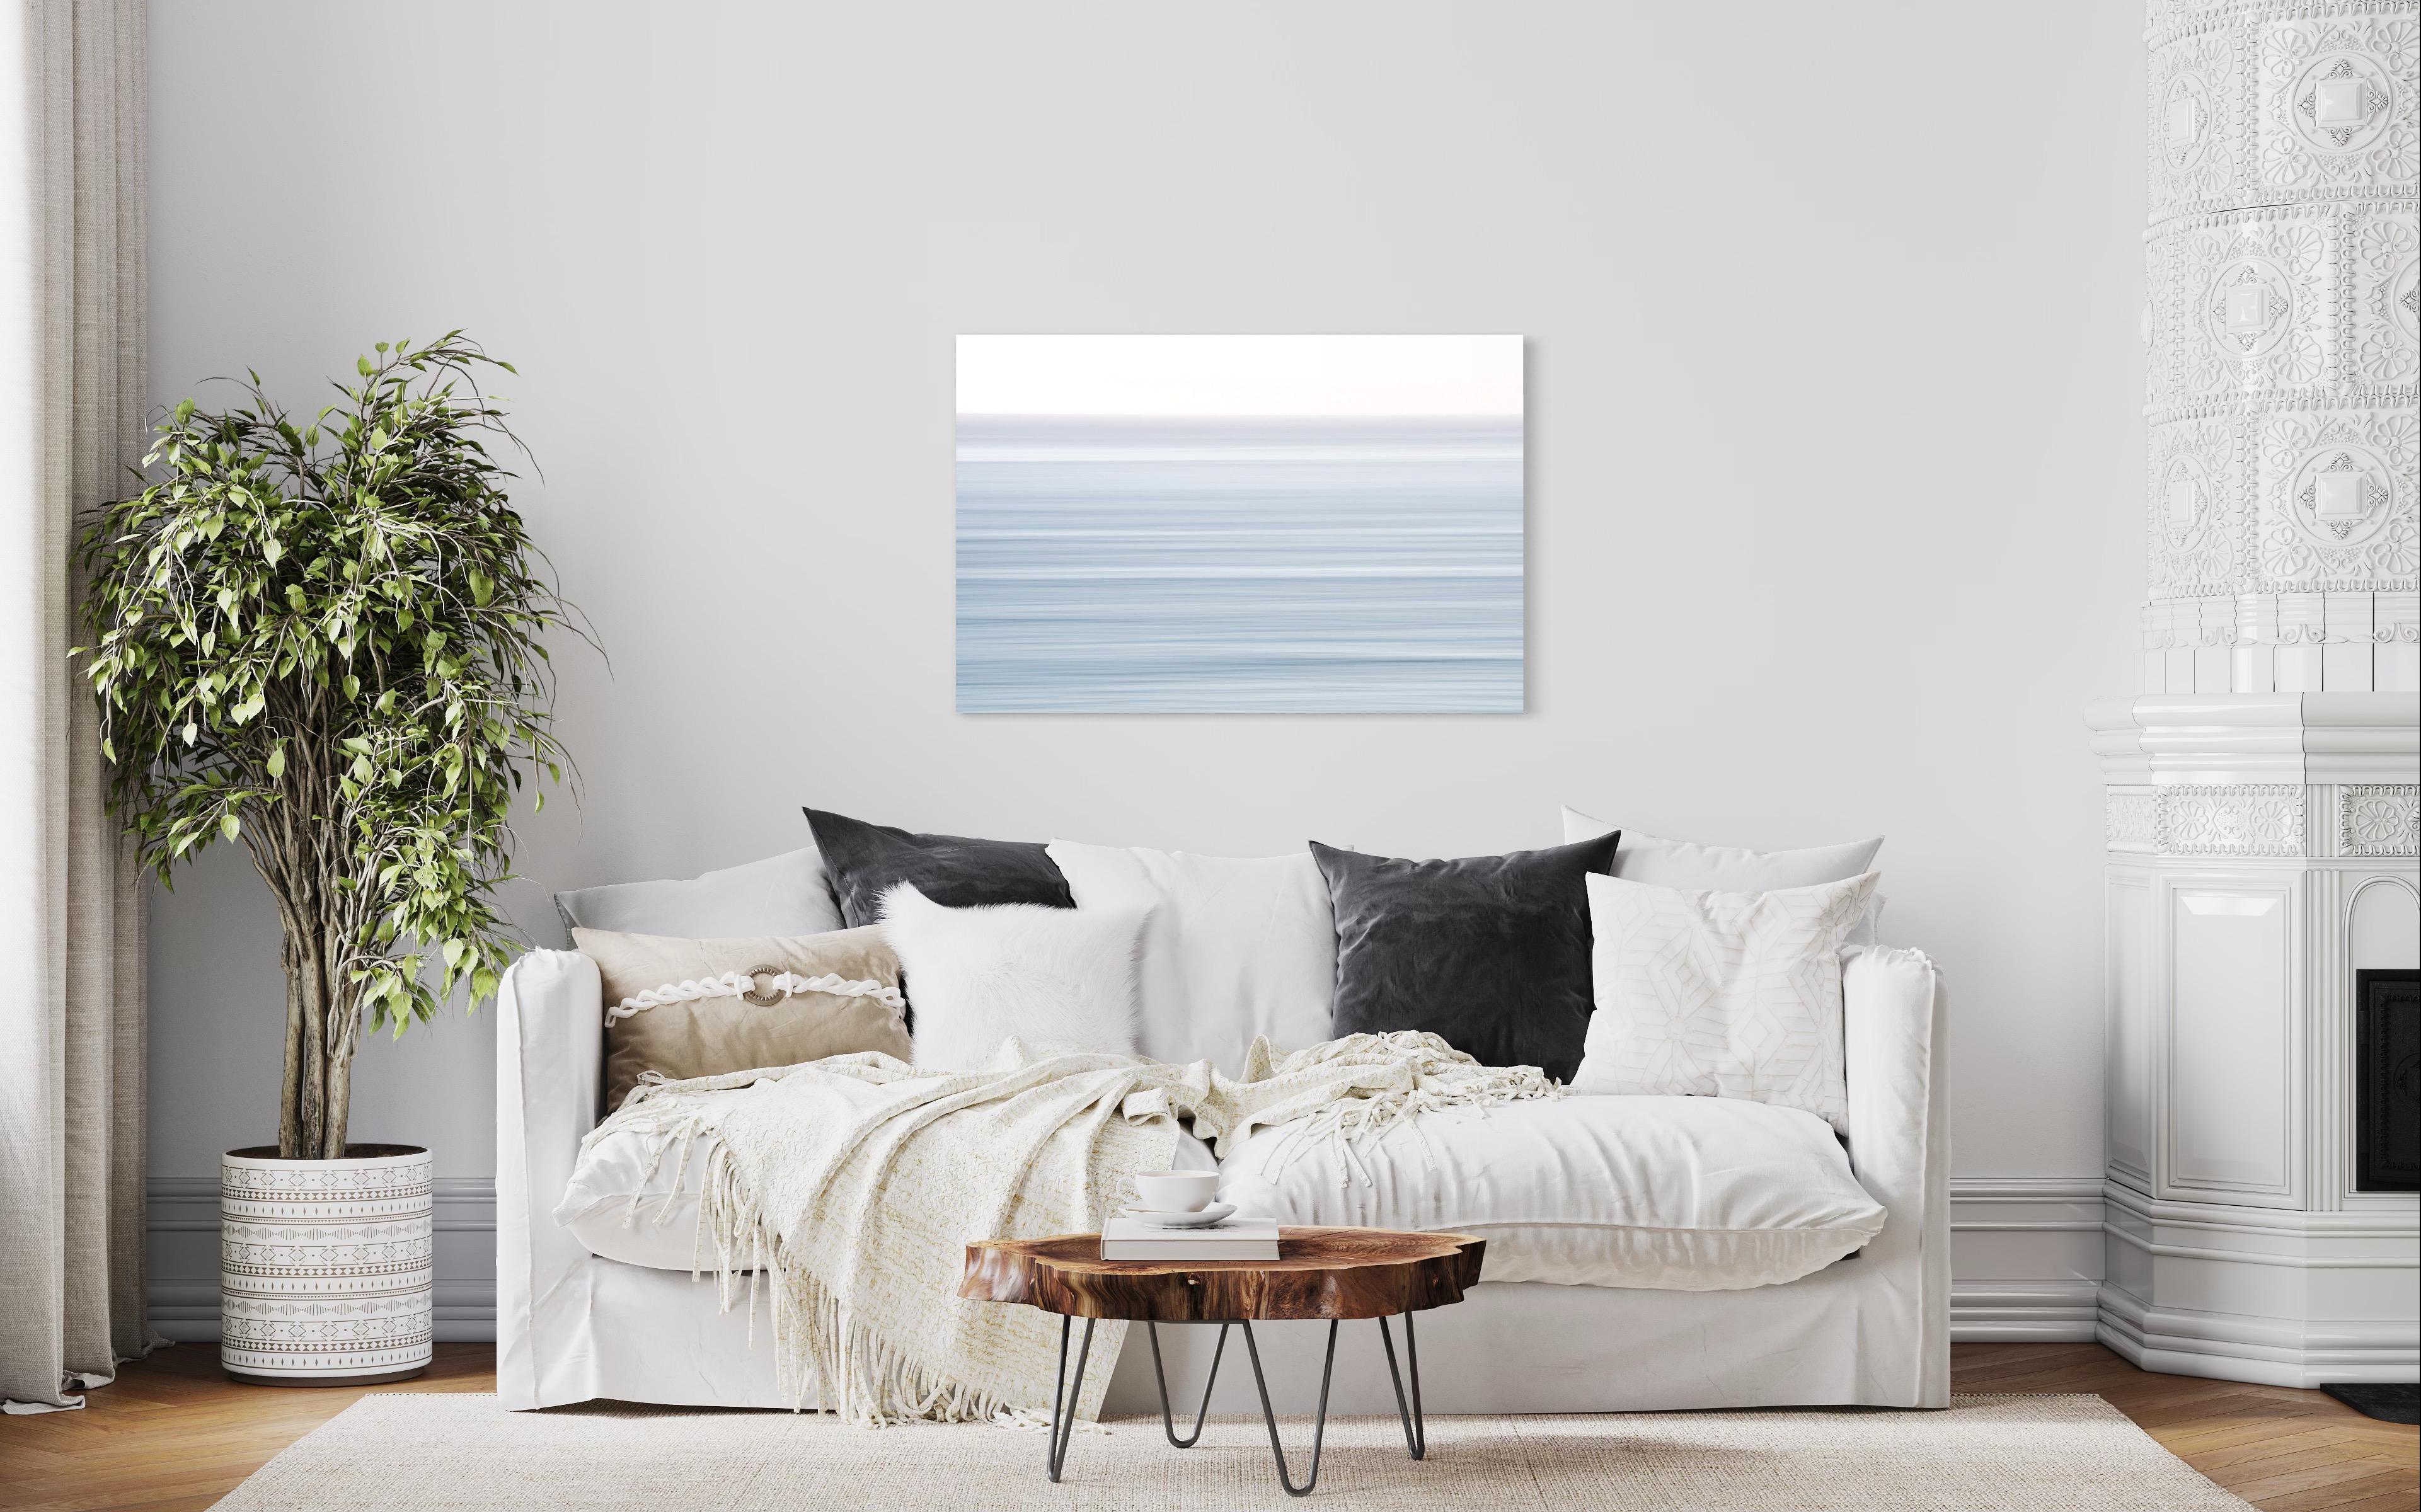 This photograph by Tori Gagne features an abstracted landscape composition and a light blue-grey and white palette. An edition size of 25, this photograph is available as a metal sublimation print with a 1.3” deep silver flush mount frame and white